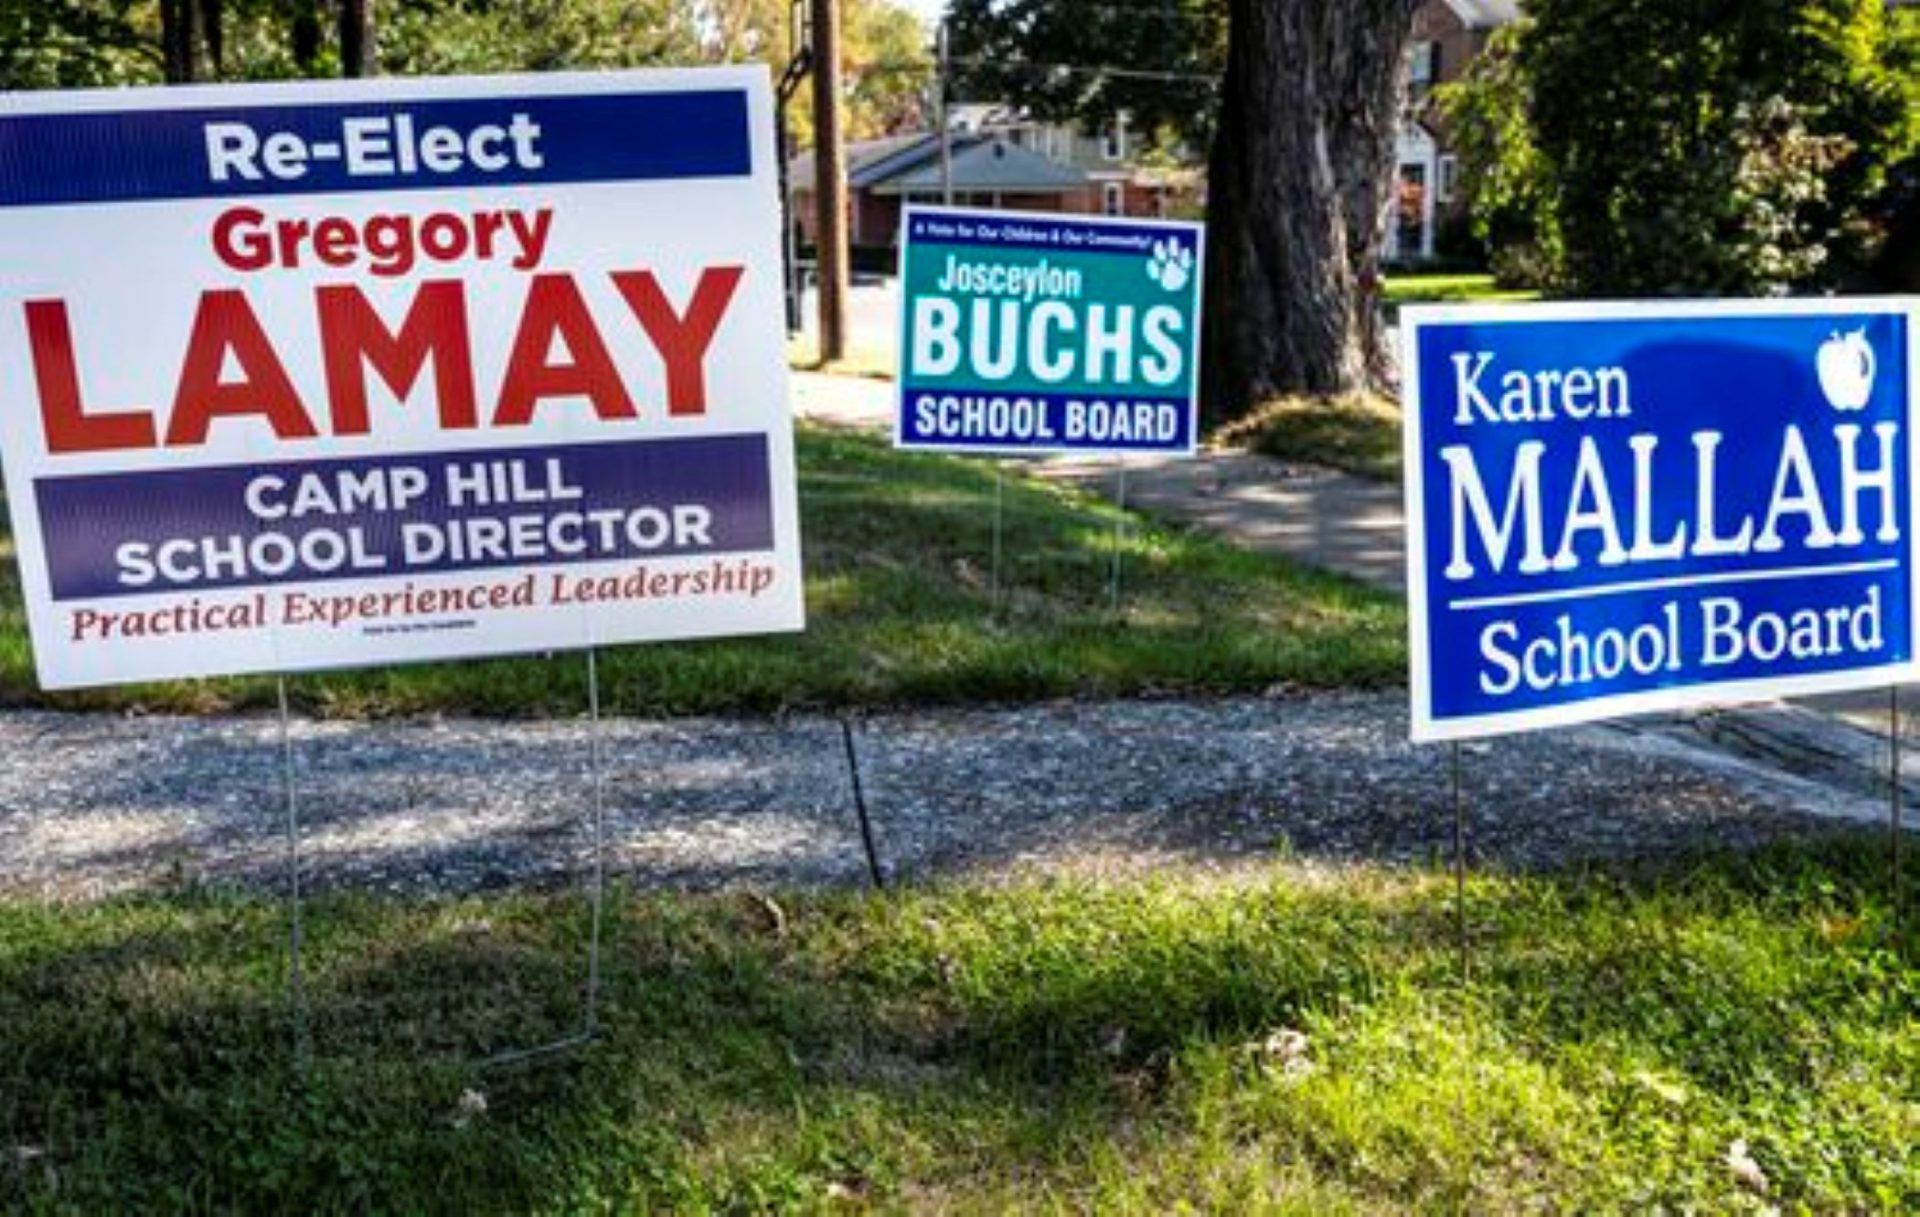 School board races used to be down-ballot sleeper contests. These days, the local races bear much of the national partisan rhetoric, making, in some cases, for combustible local politics. The Camp Hill borough school board race is one local contest being buffeted by hyper partisanship